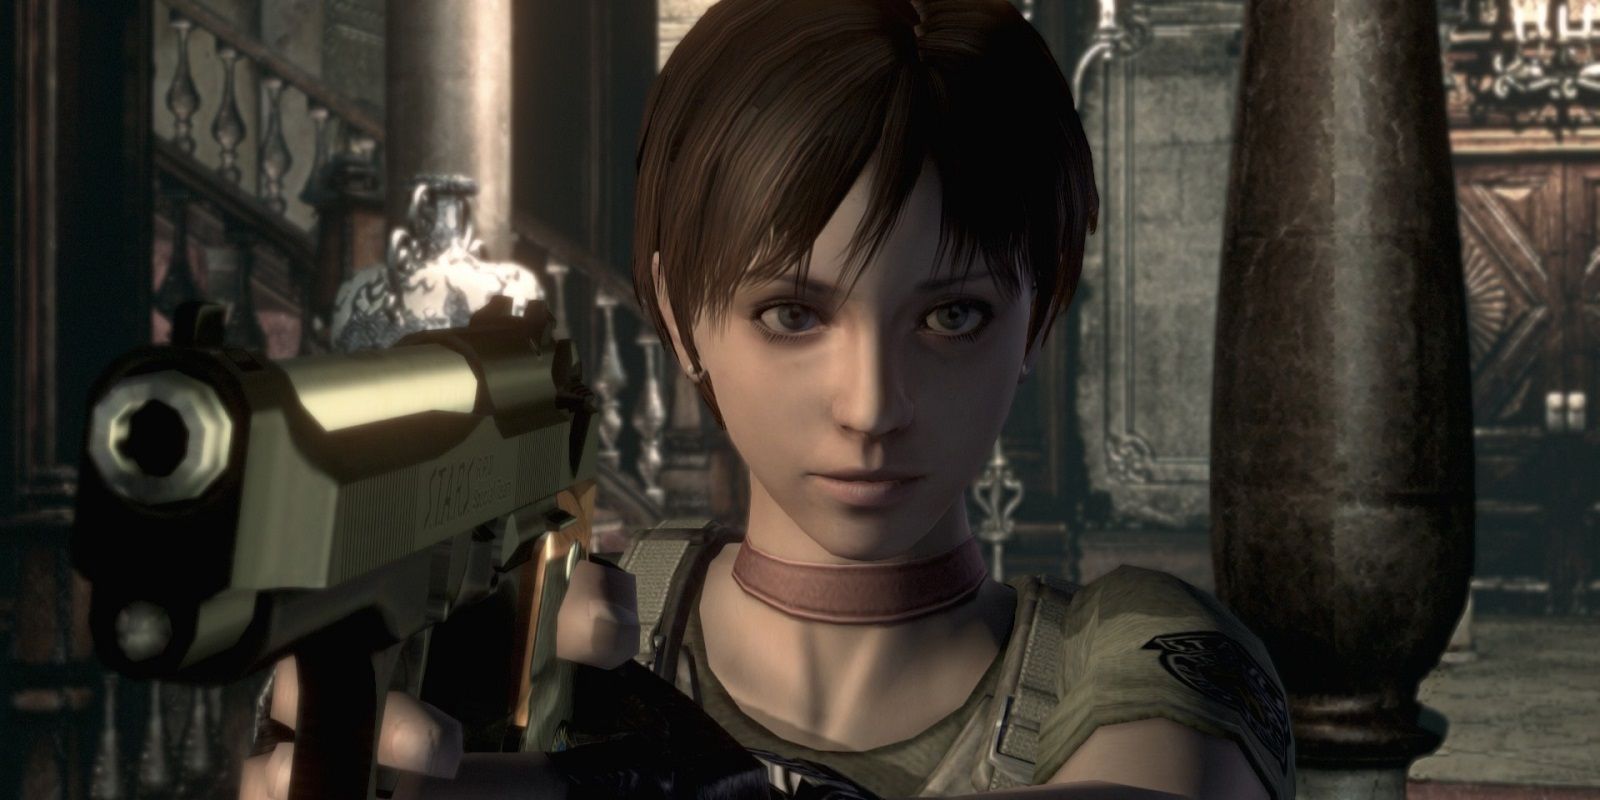 Rebecca Chambers points two guns in Resident Evil